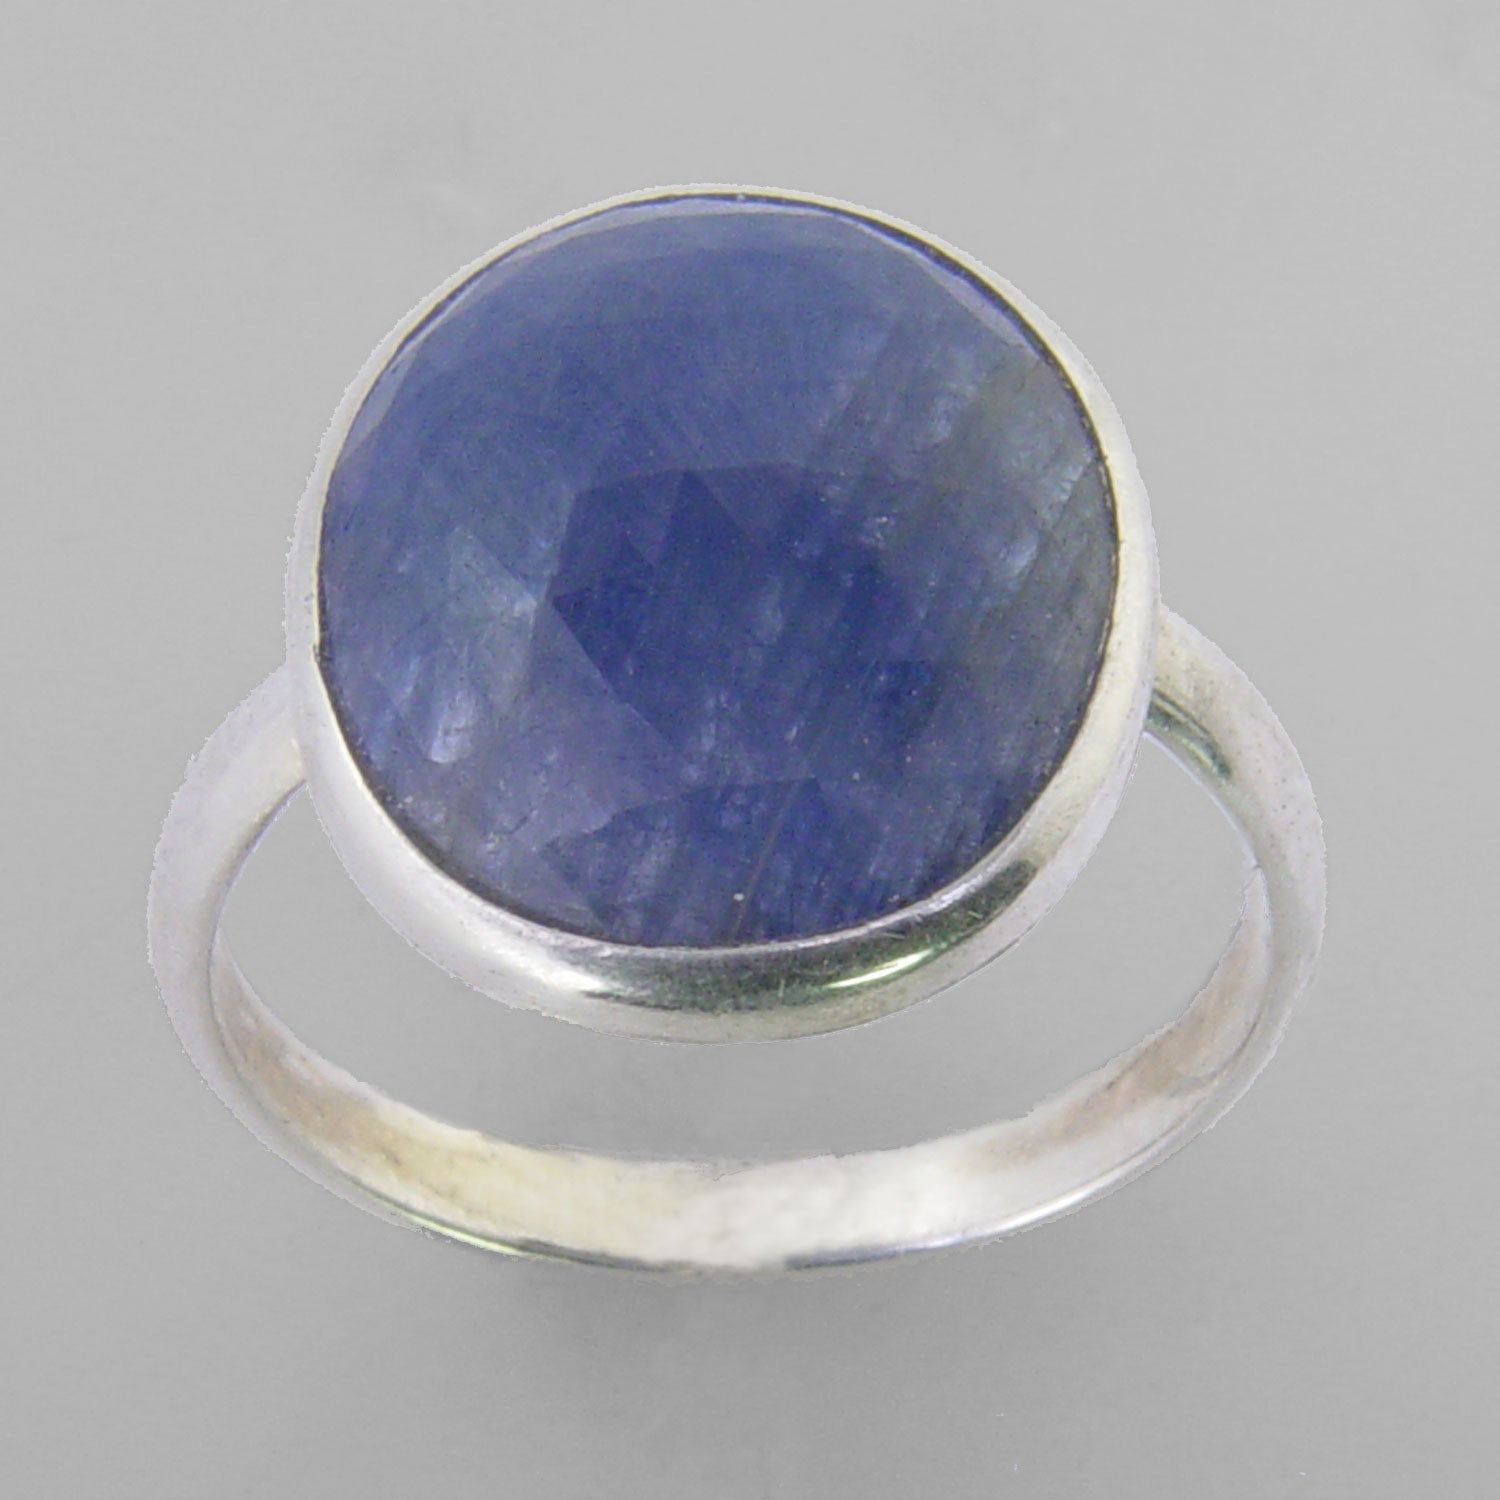 Blue Sapphire 6 ct Faceted Oval Cab Sterling Silver Ring, Size 7.75